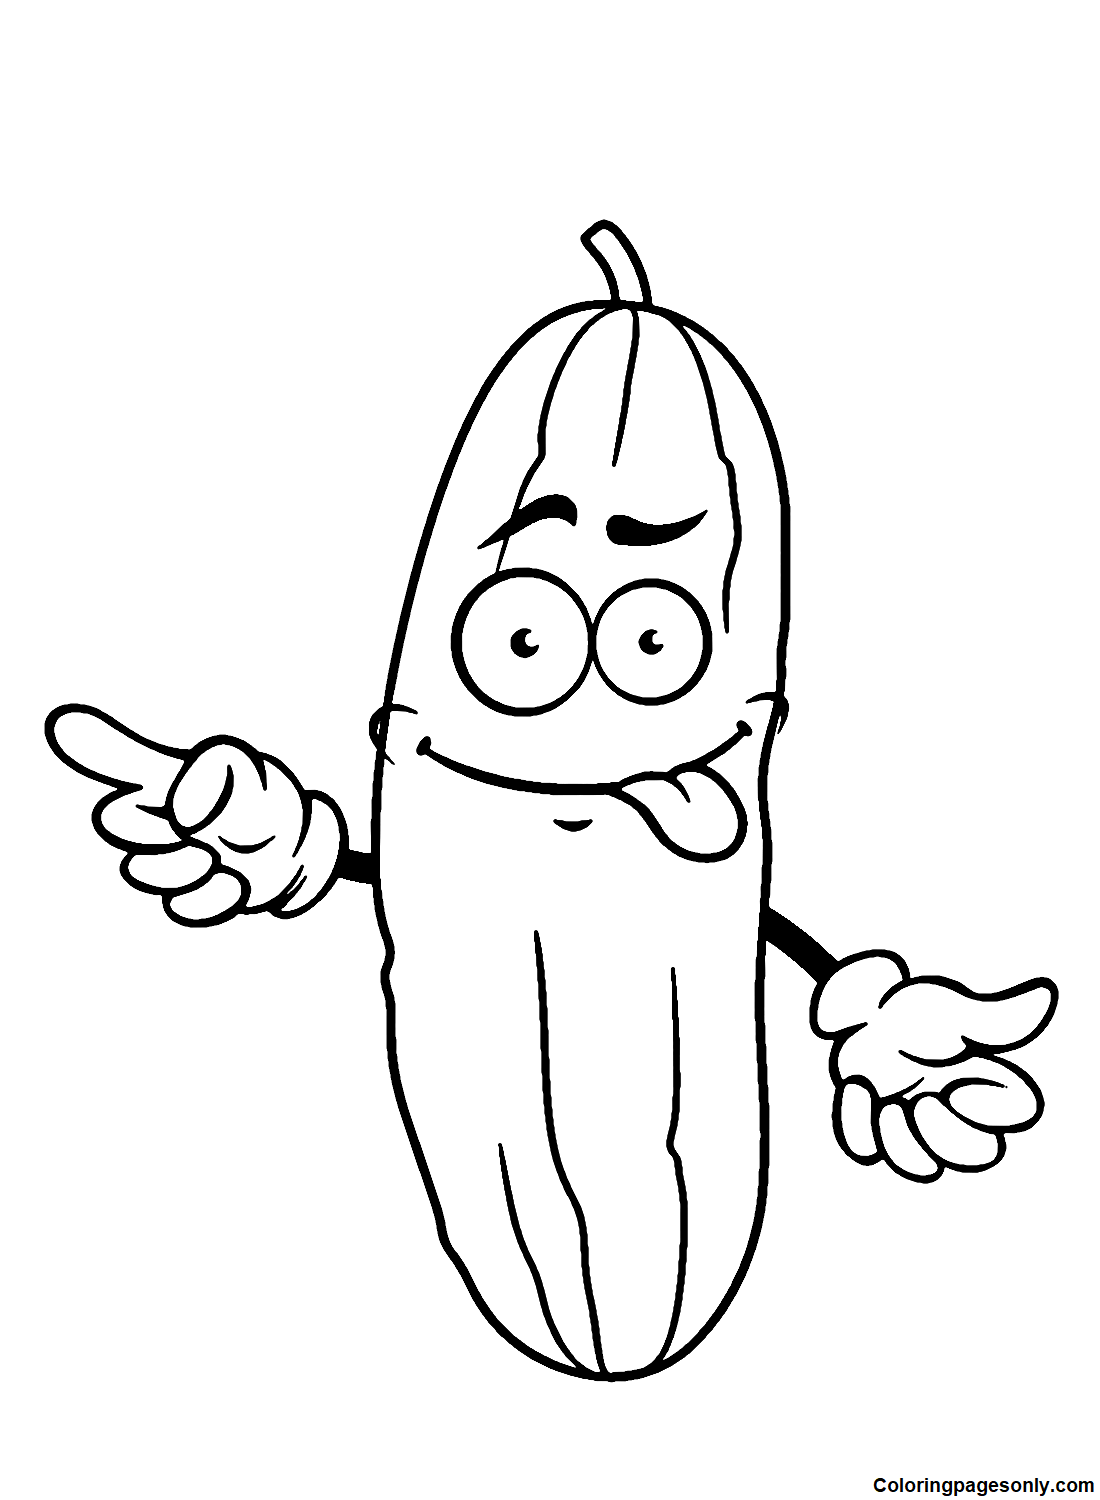 Funny Cucumber for Kids Coloring Page